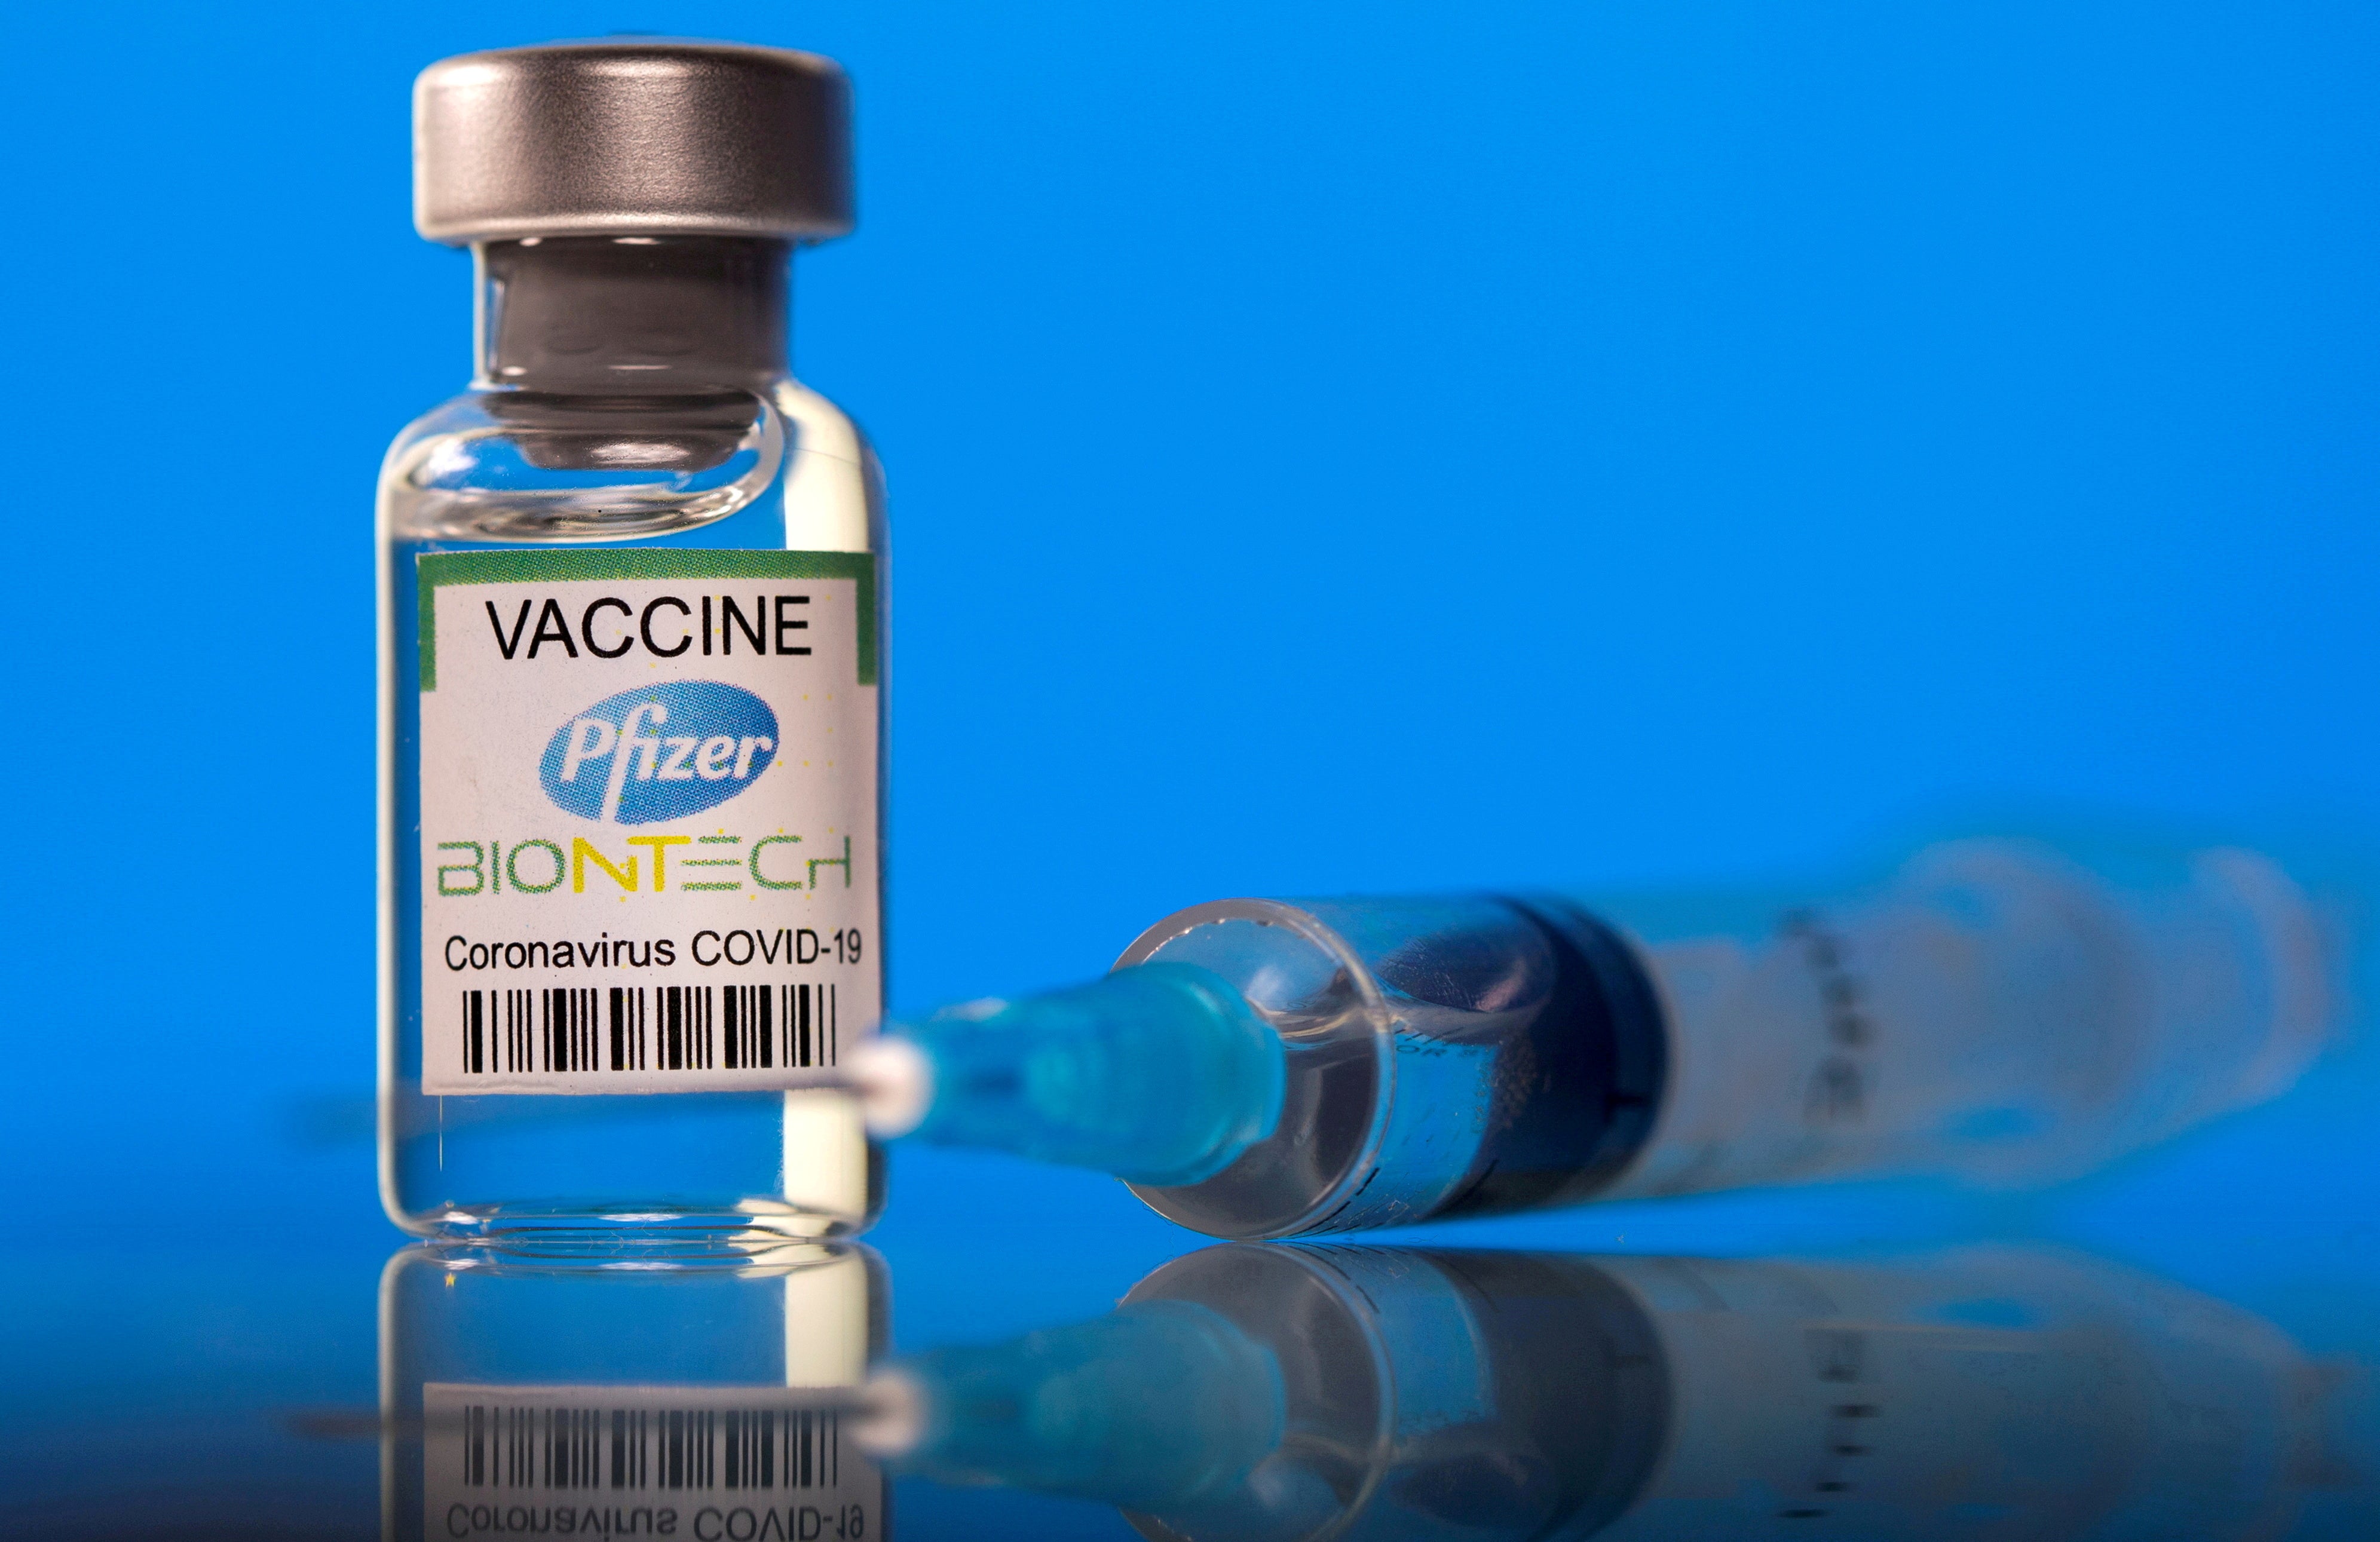 New Zealand’s vaccine safety monitoring board is investigating a death following vaccination with the Pfizer Covid-19 vaccine